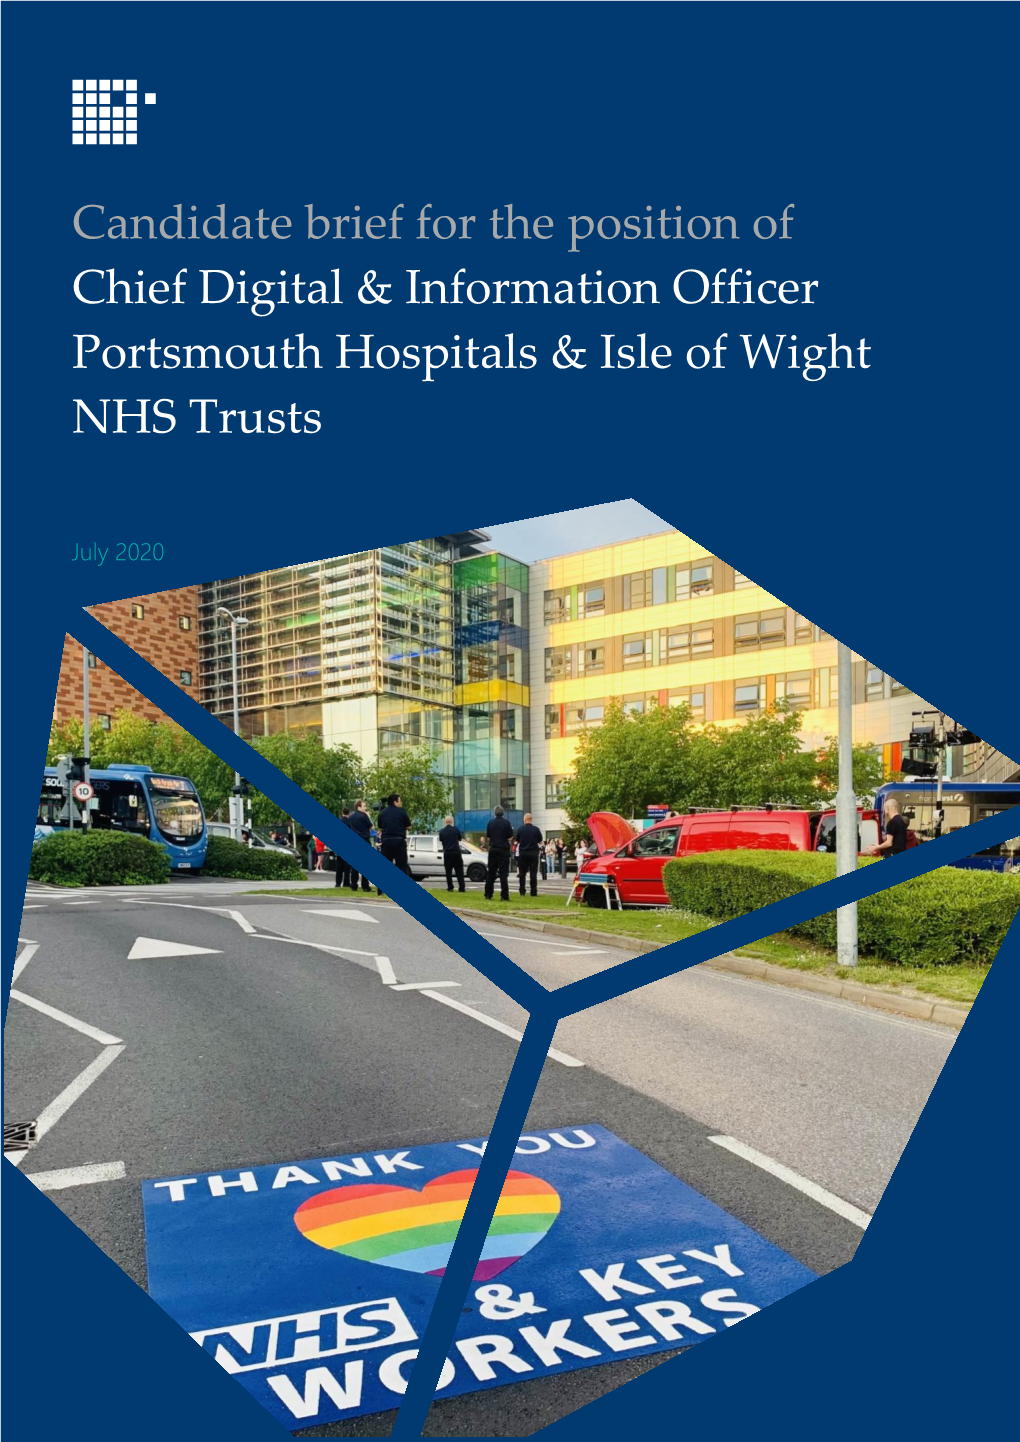 Candidate Brief for the Position of Chief Digital & Information Officer Portsmouth Hospitals & Isle of Wight NHS Trusts